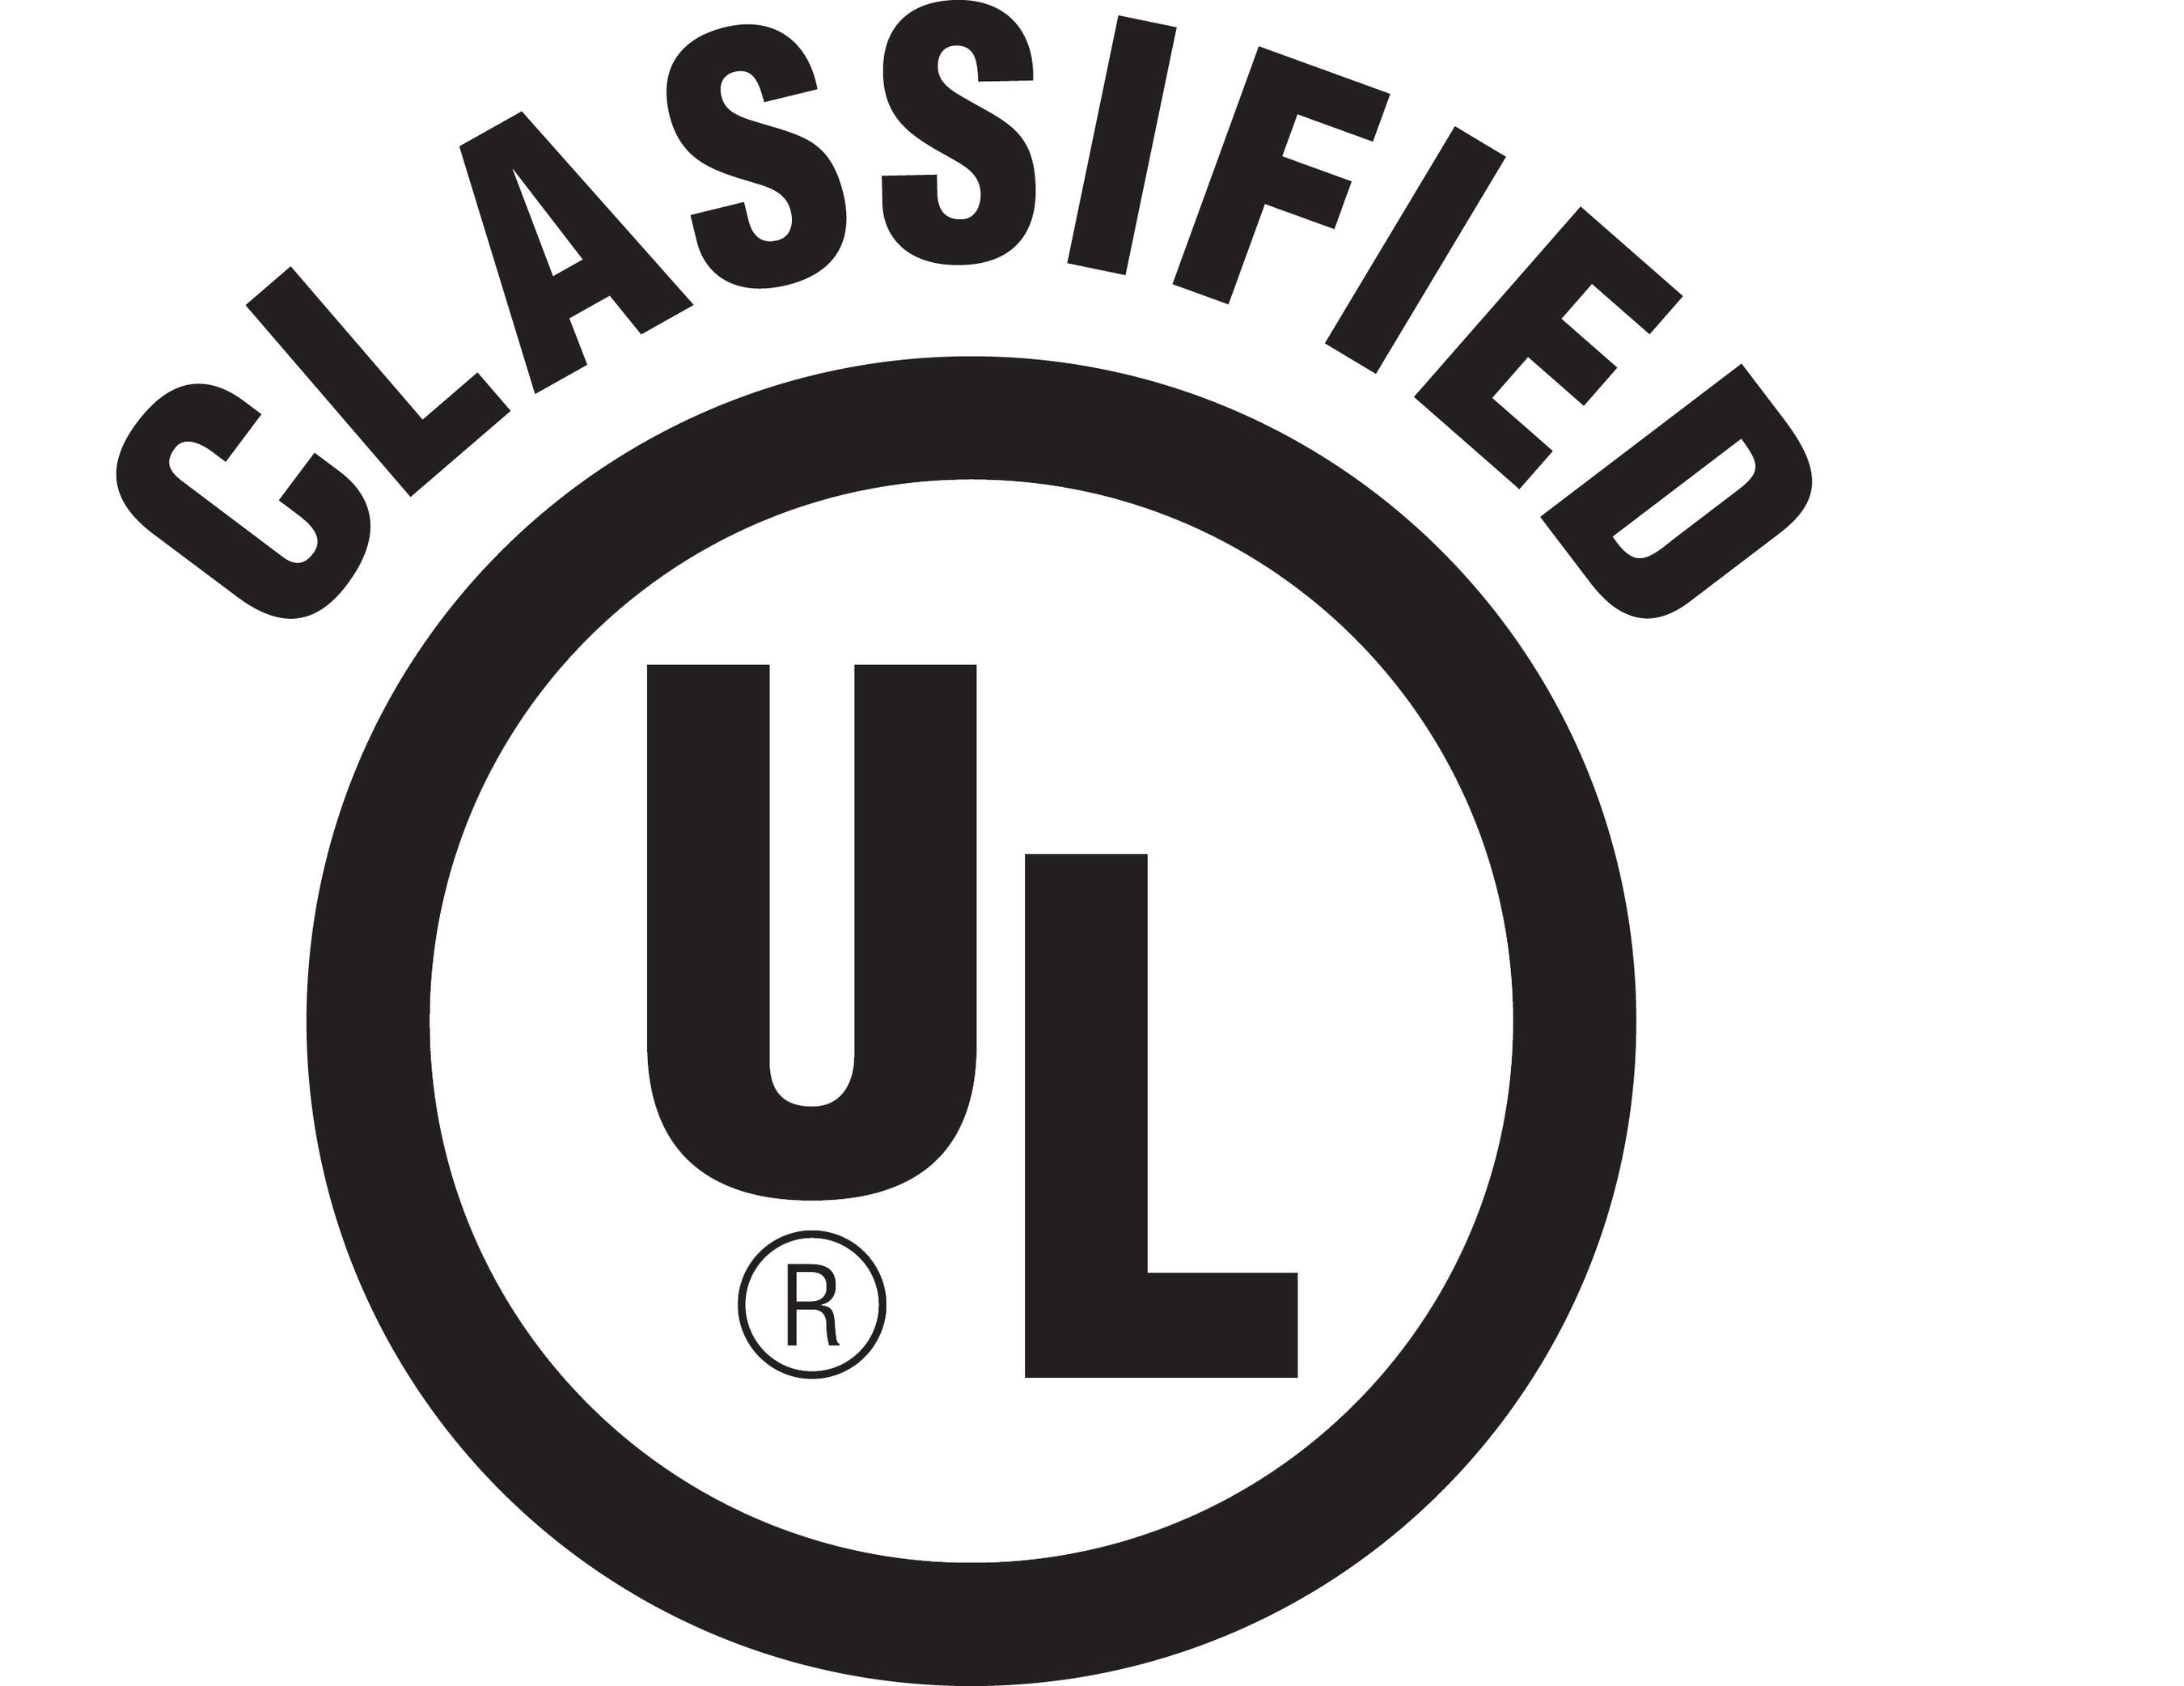 This the LOGO of UL company